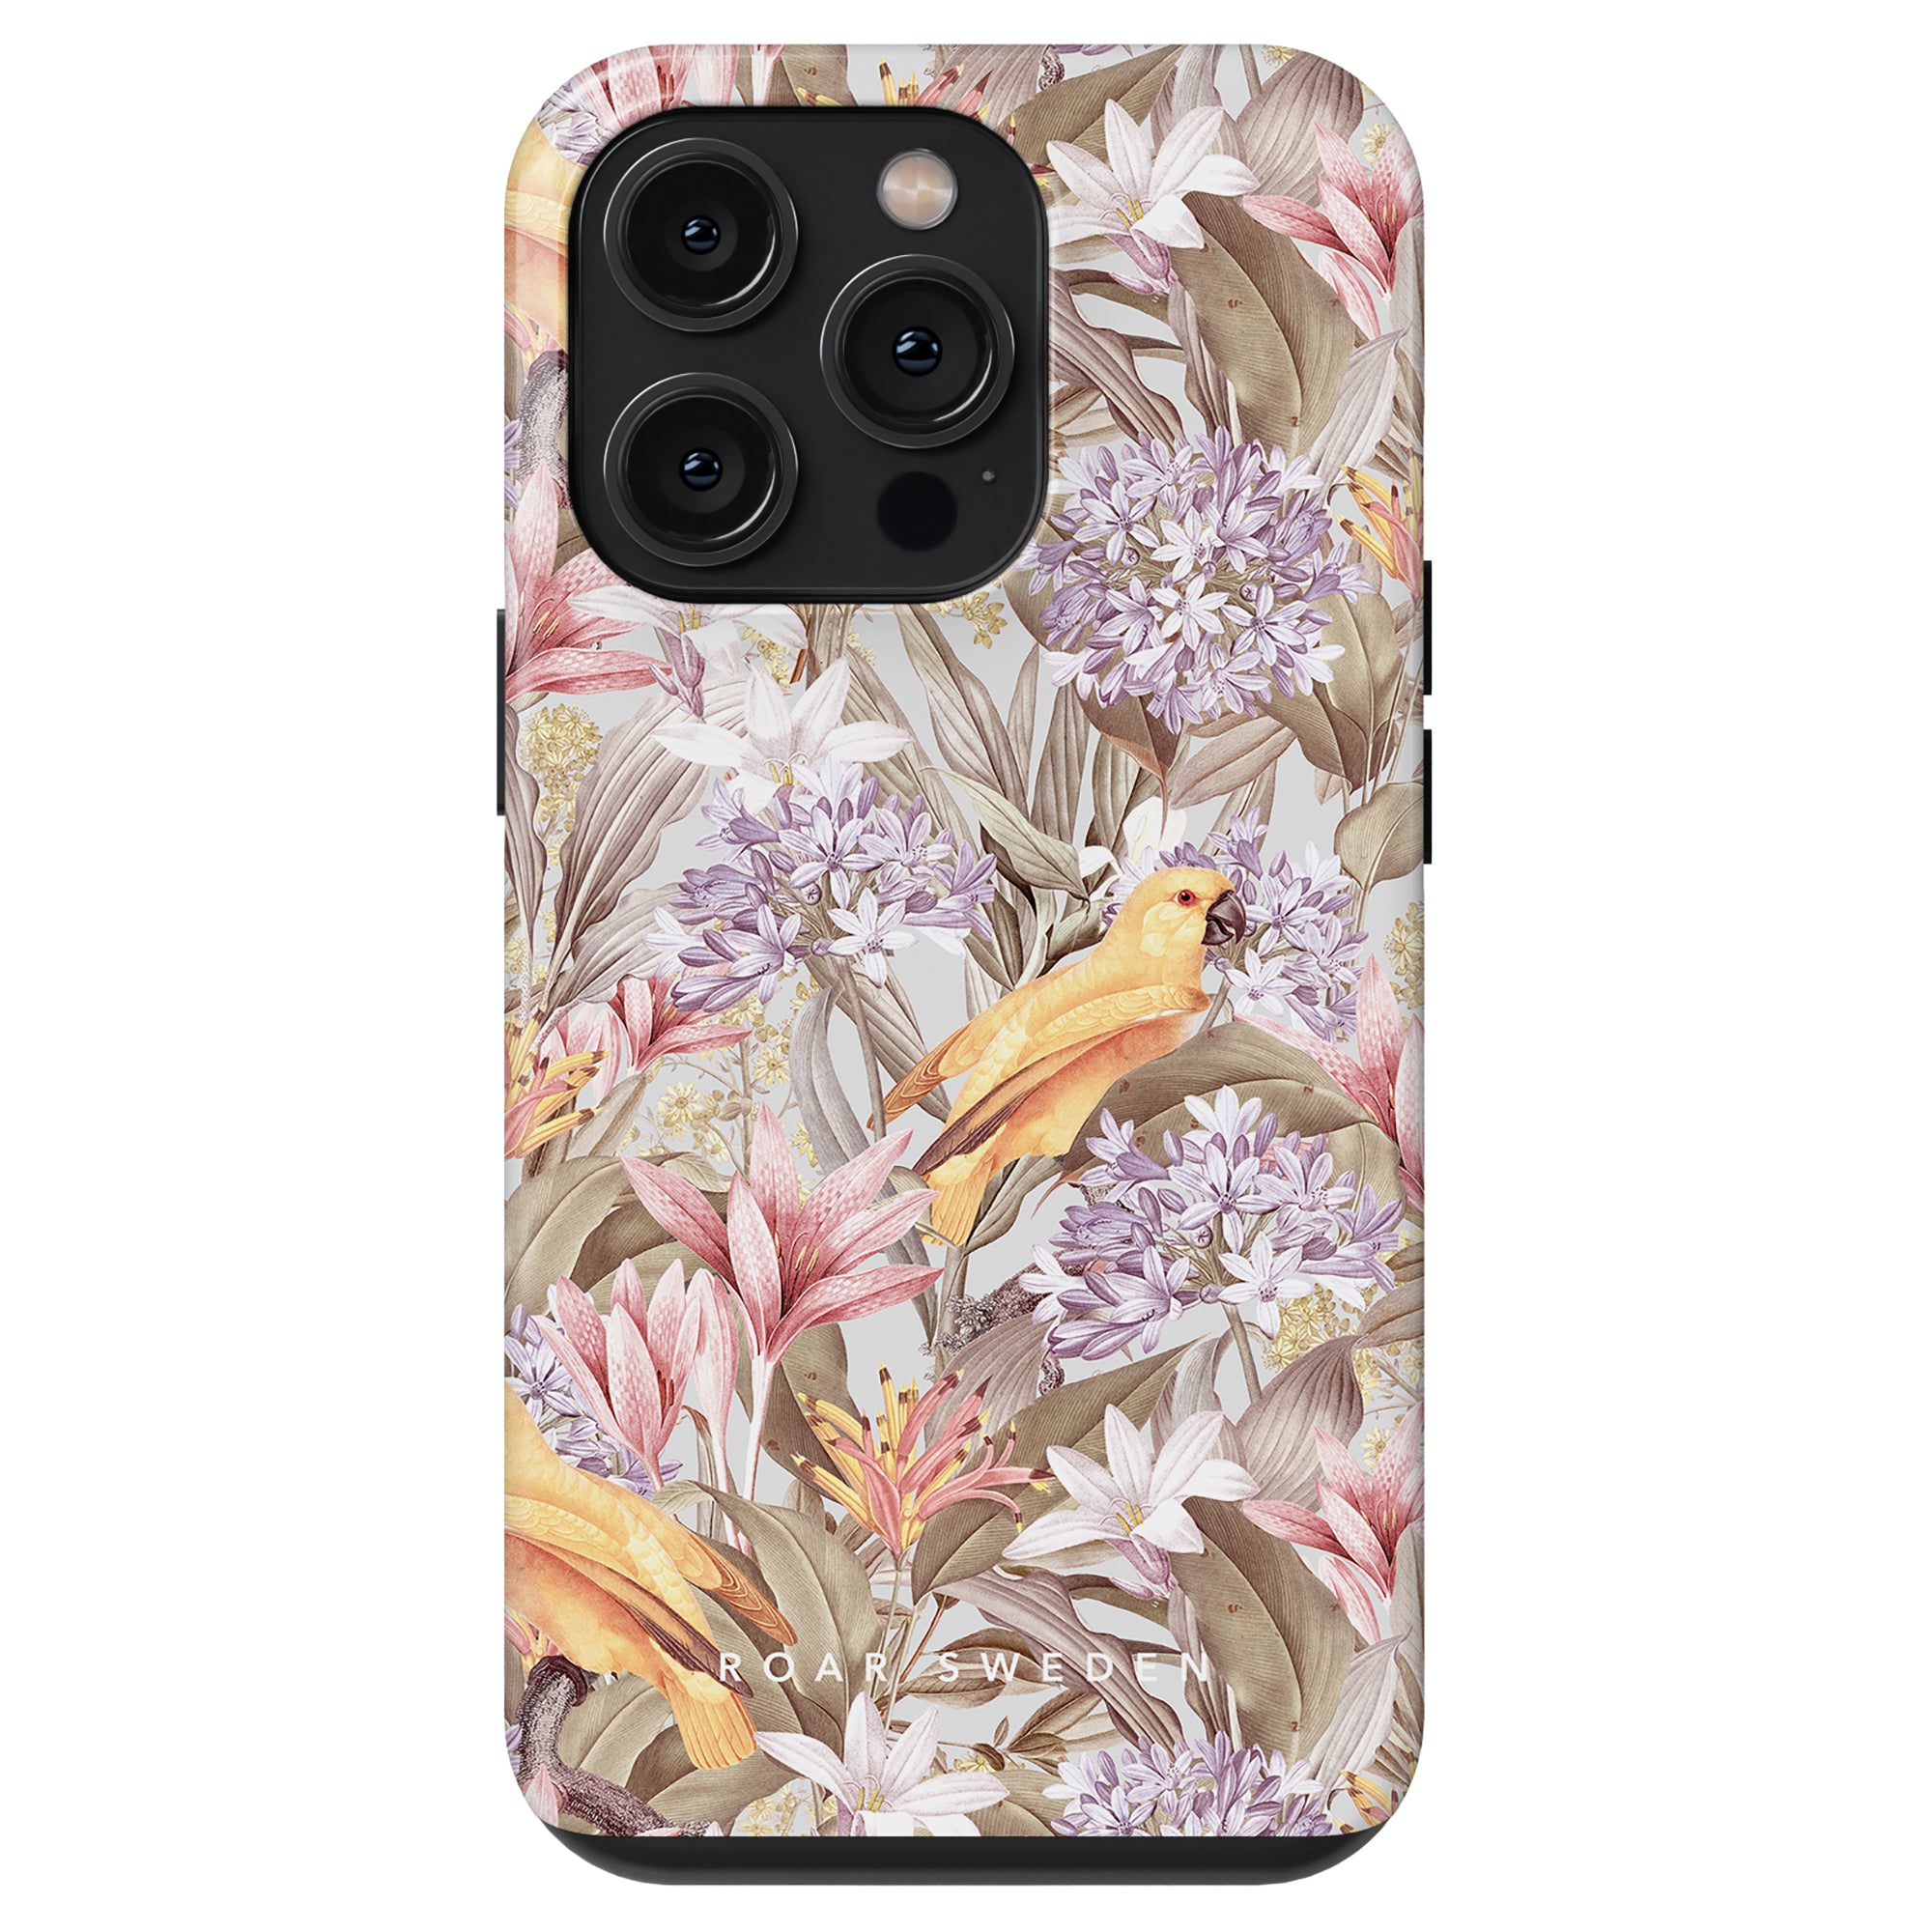 Floral and bird pattern Mango Parrot - Tough Case from the sommar collection with camera cut-outs.